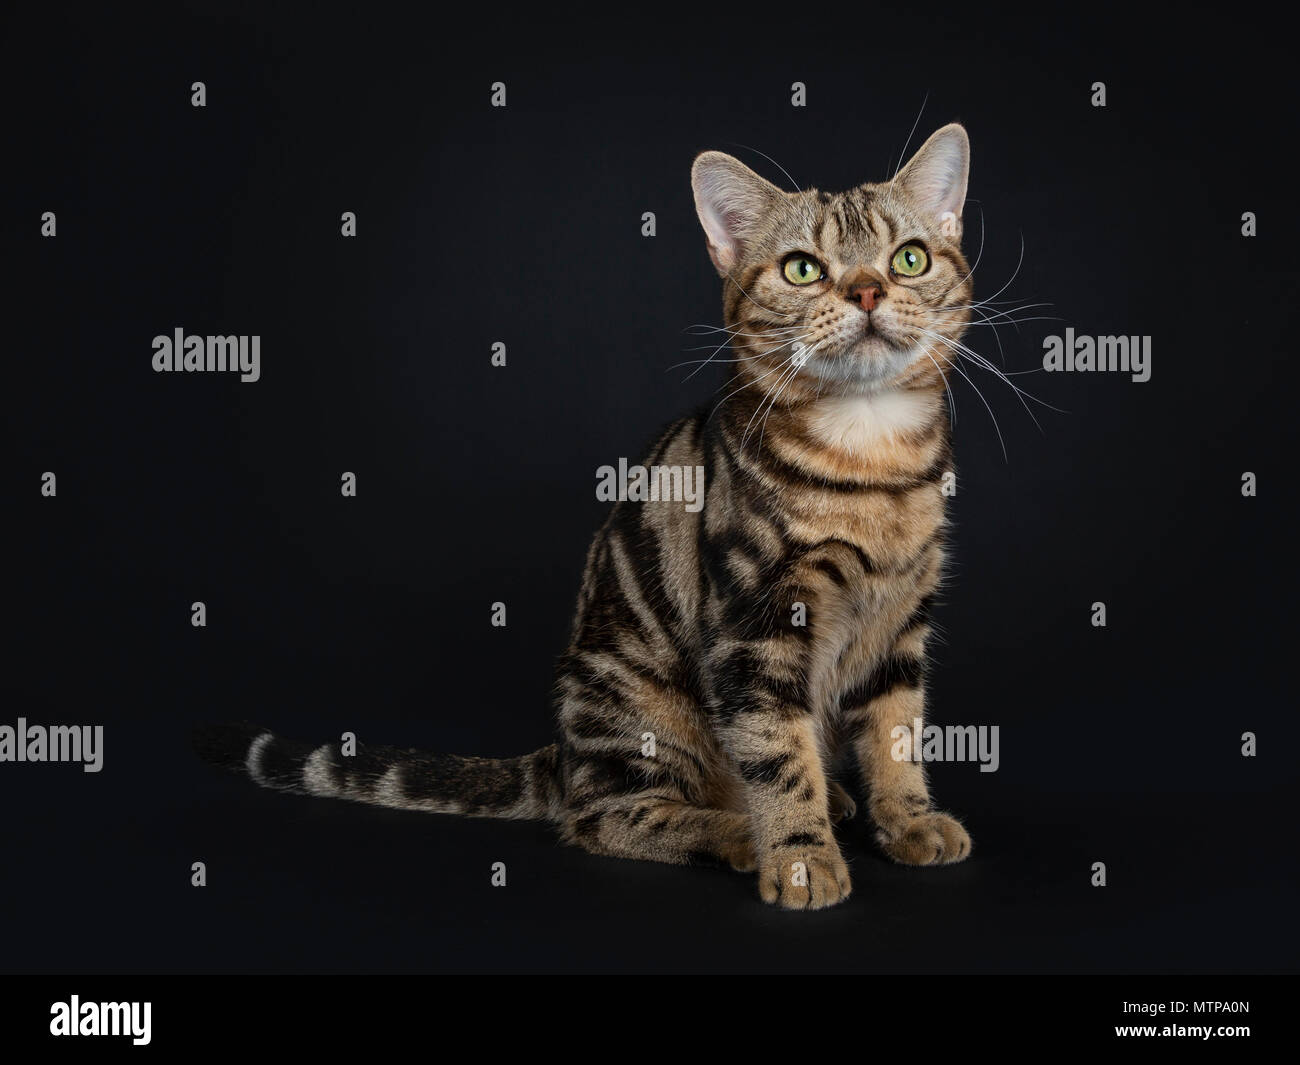 Brown and black tabby American Shorthair cat kitten sitting isolated on black background and looking slightly up Stock Photo